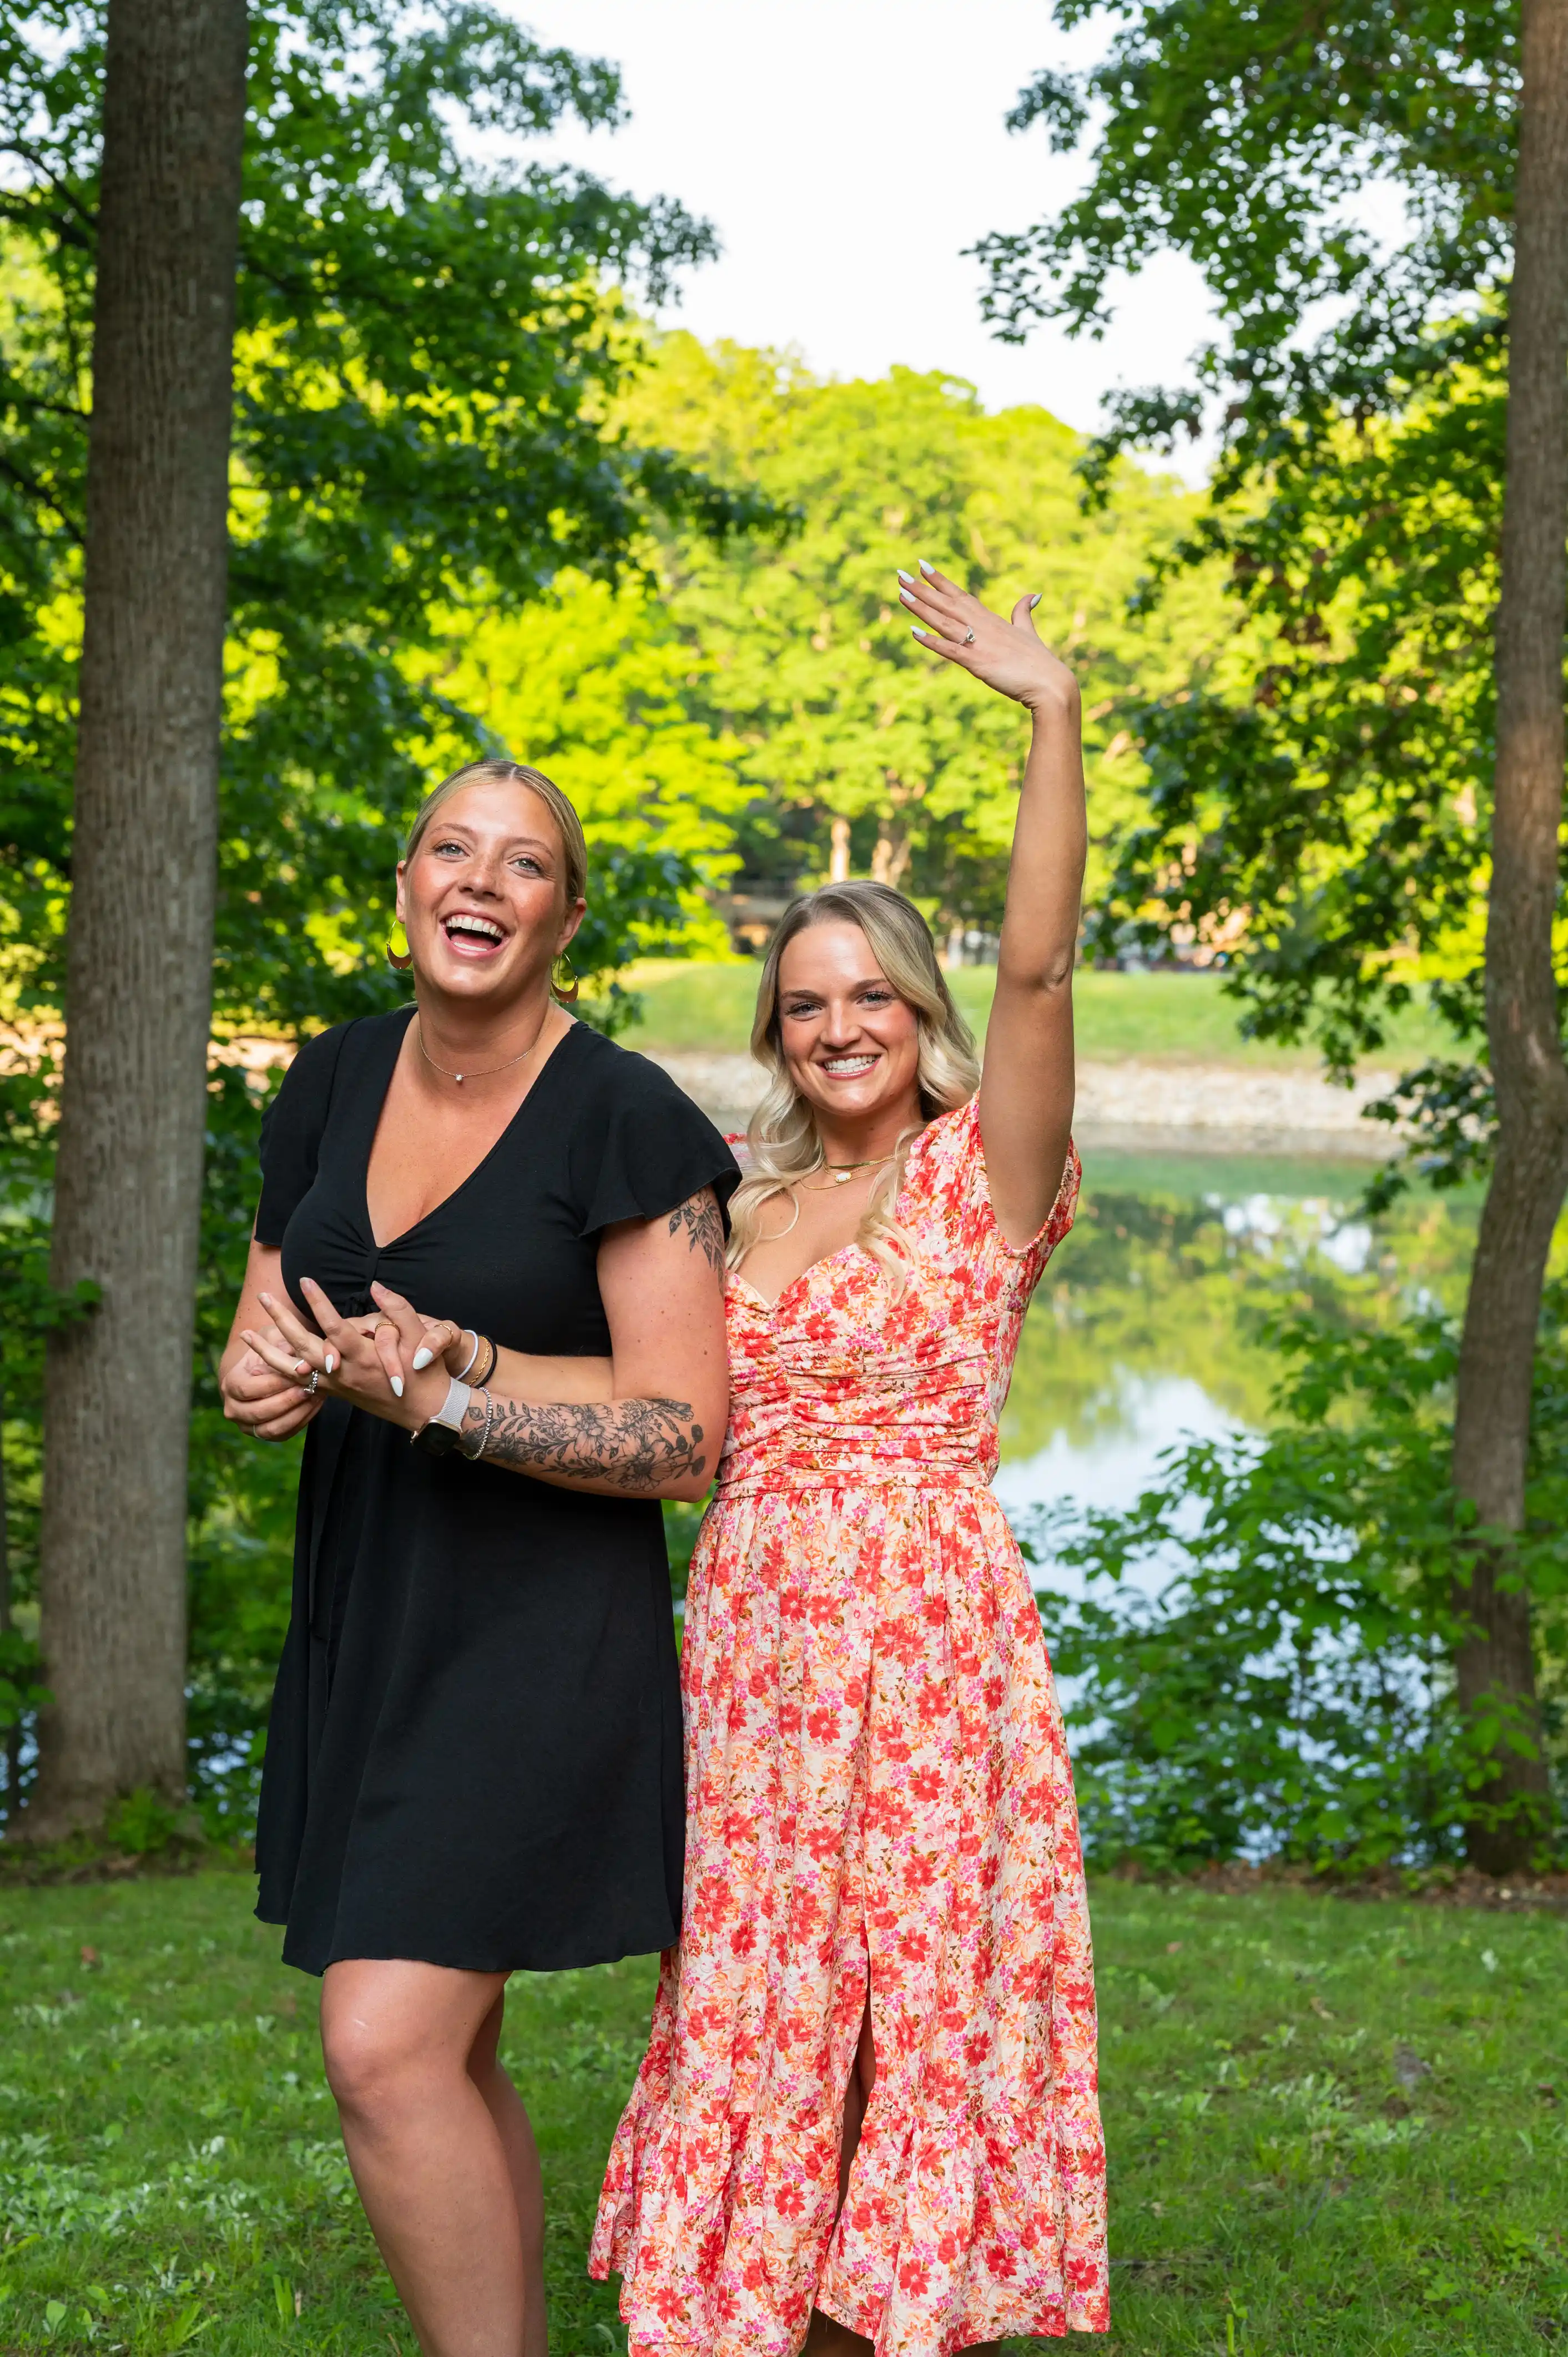 Two women smiling and celebrating in a park with one woman raising her arm in the air.